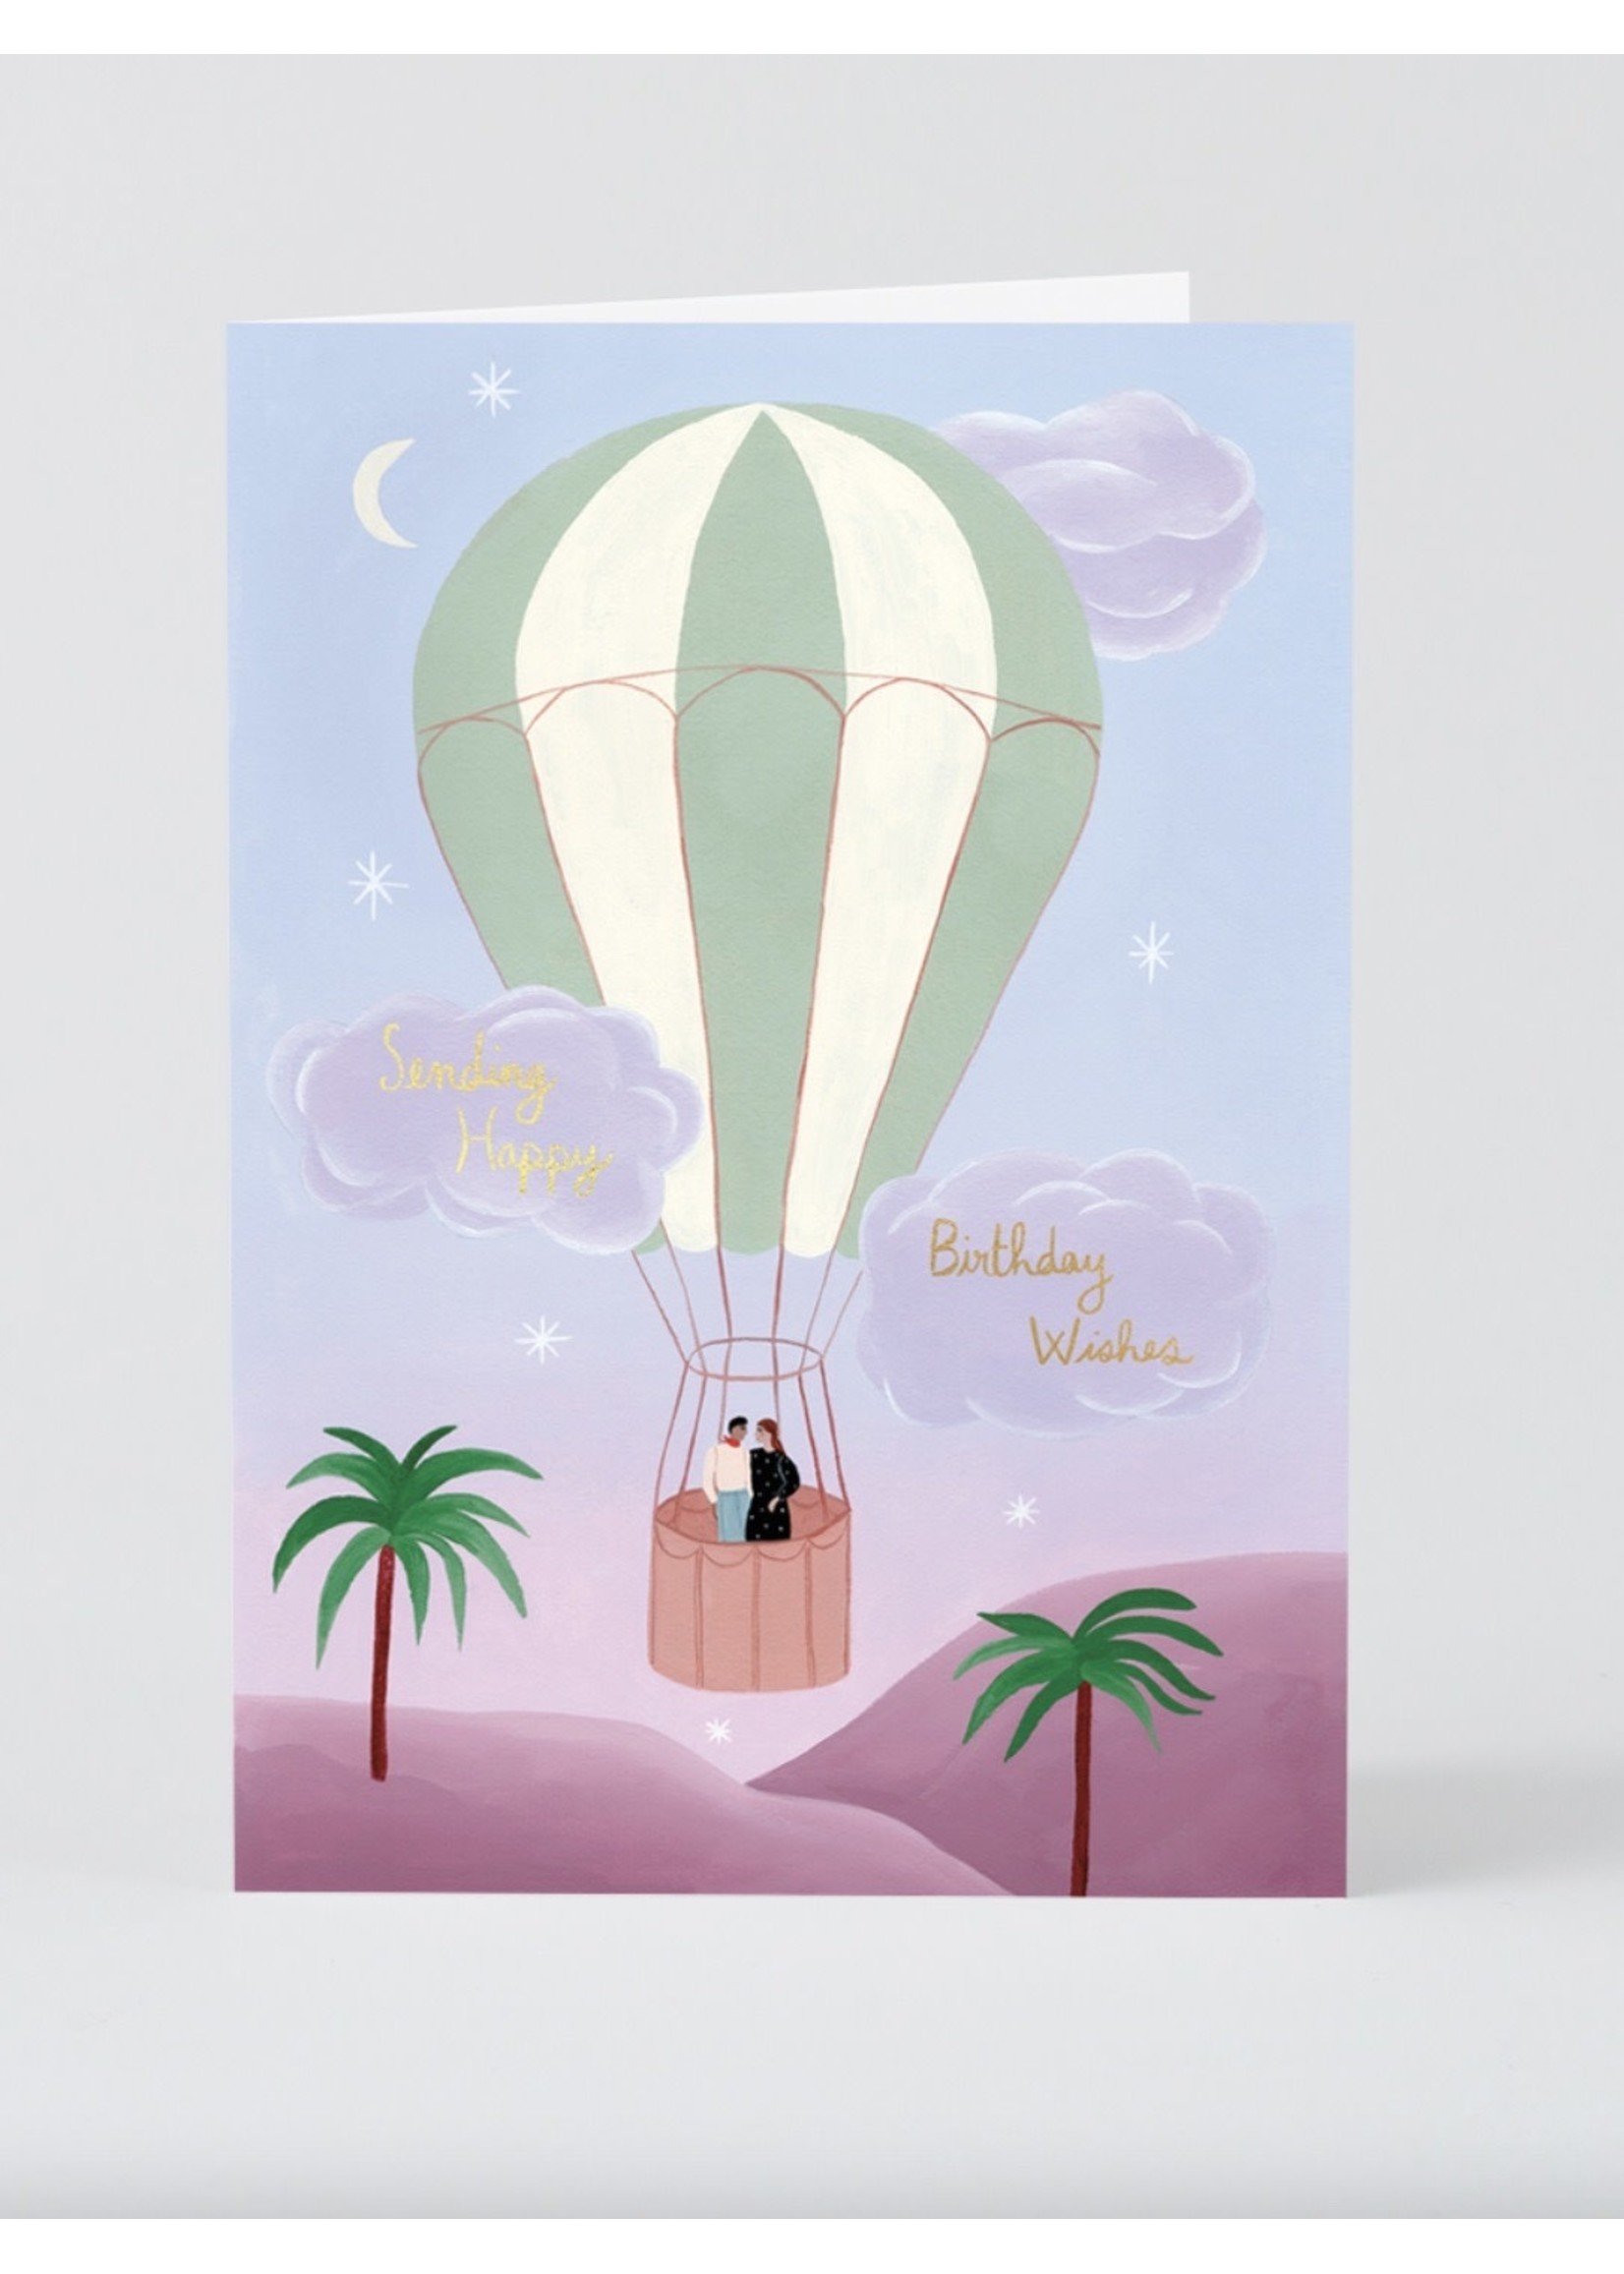 Wrap Stationery Isabelle Feliu Greeting Cards by Wrap